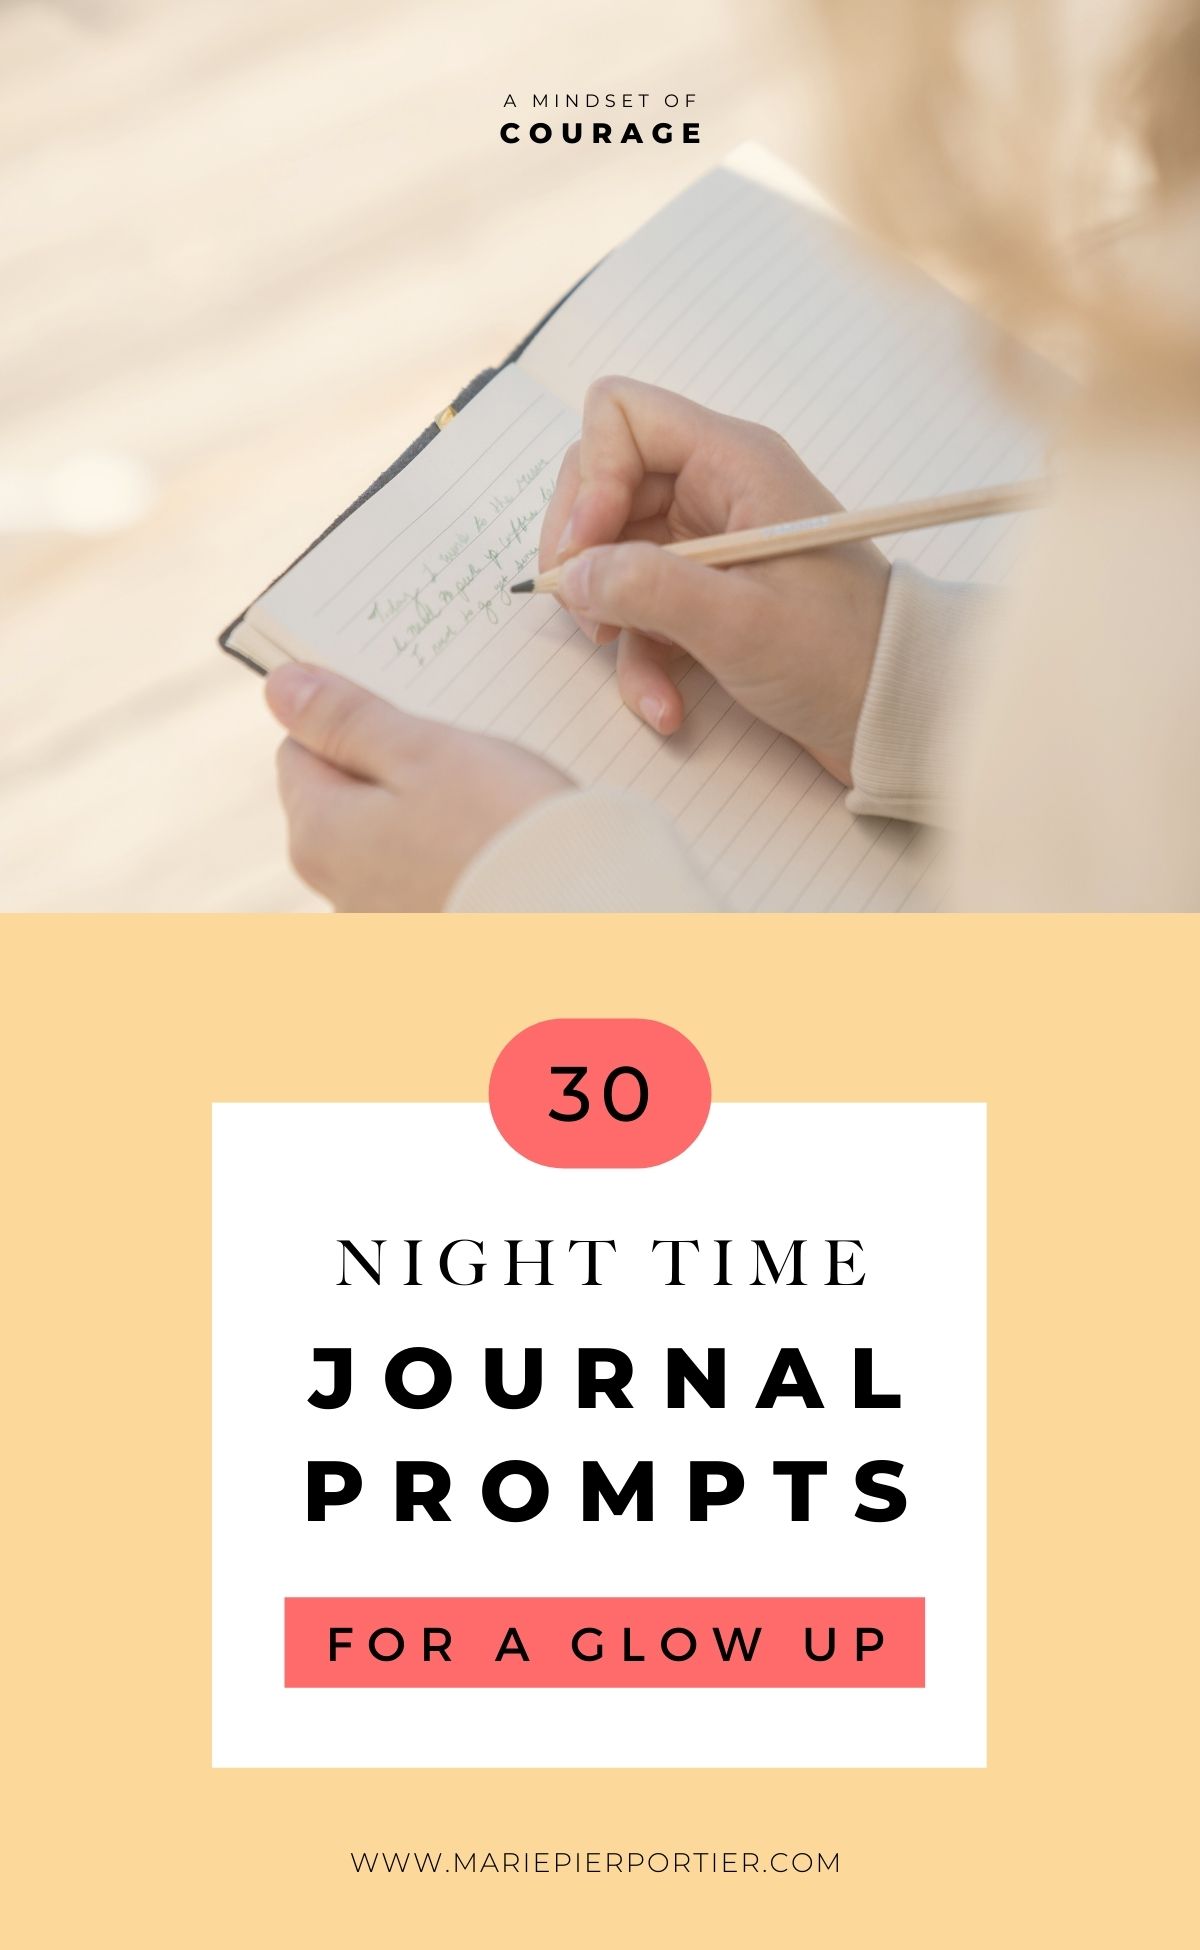 30 Night Time Journal Prompts To Reflect and Unwind